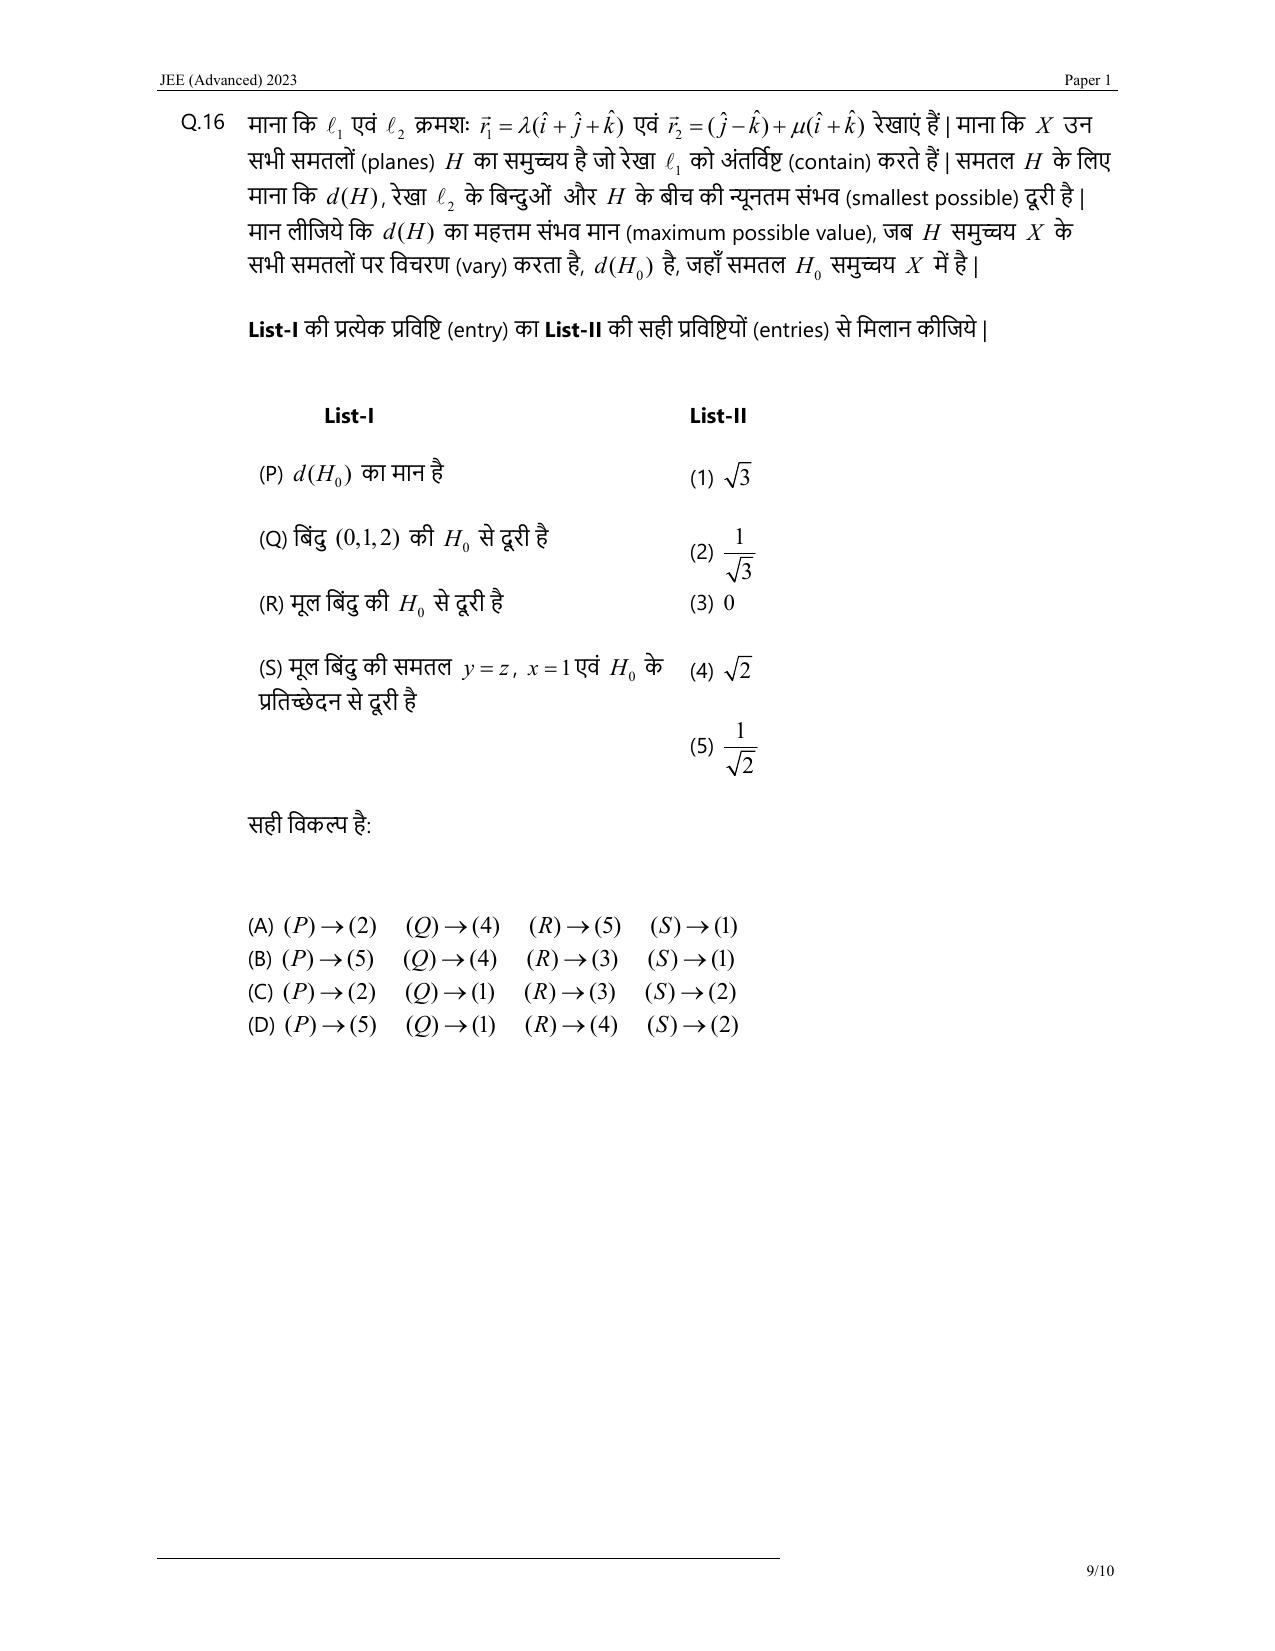 JEE Advanced 2023 Question Paper 1 (Hindi) - Page 9